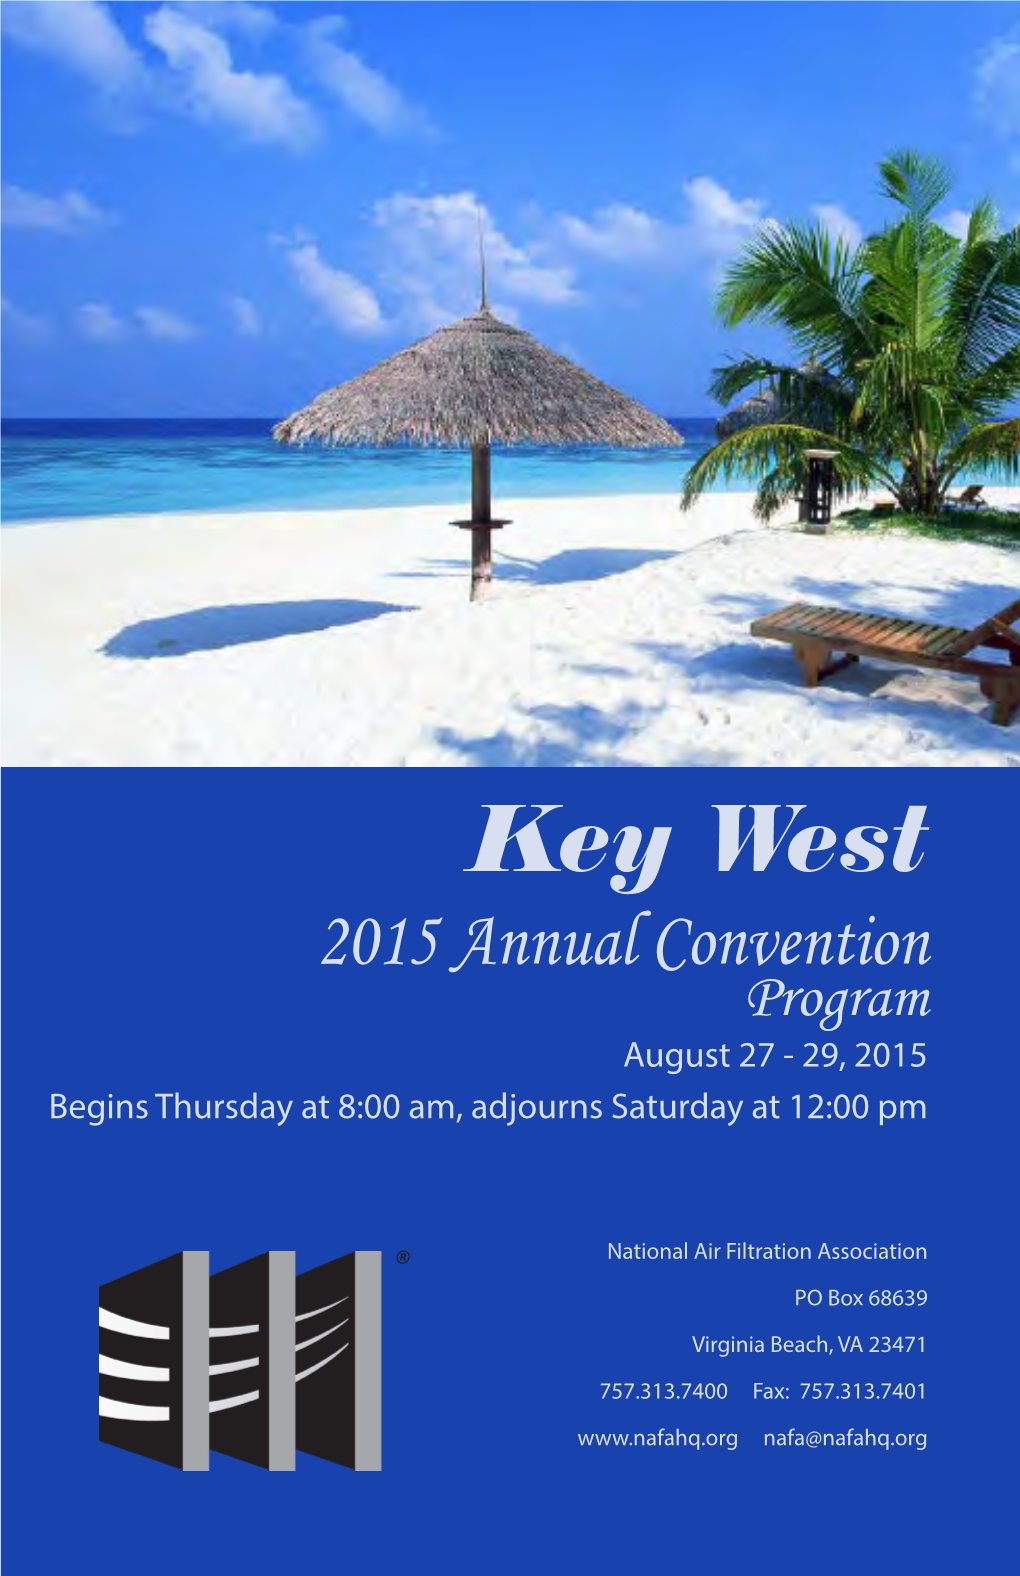 Key West 2015 Annual Convention Program August 27 - 29, 2015 Begins Thursday at 8:00 Am, Adjourns Saturday at 12:00 Pm